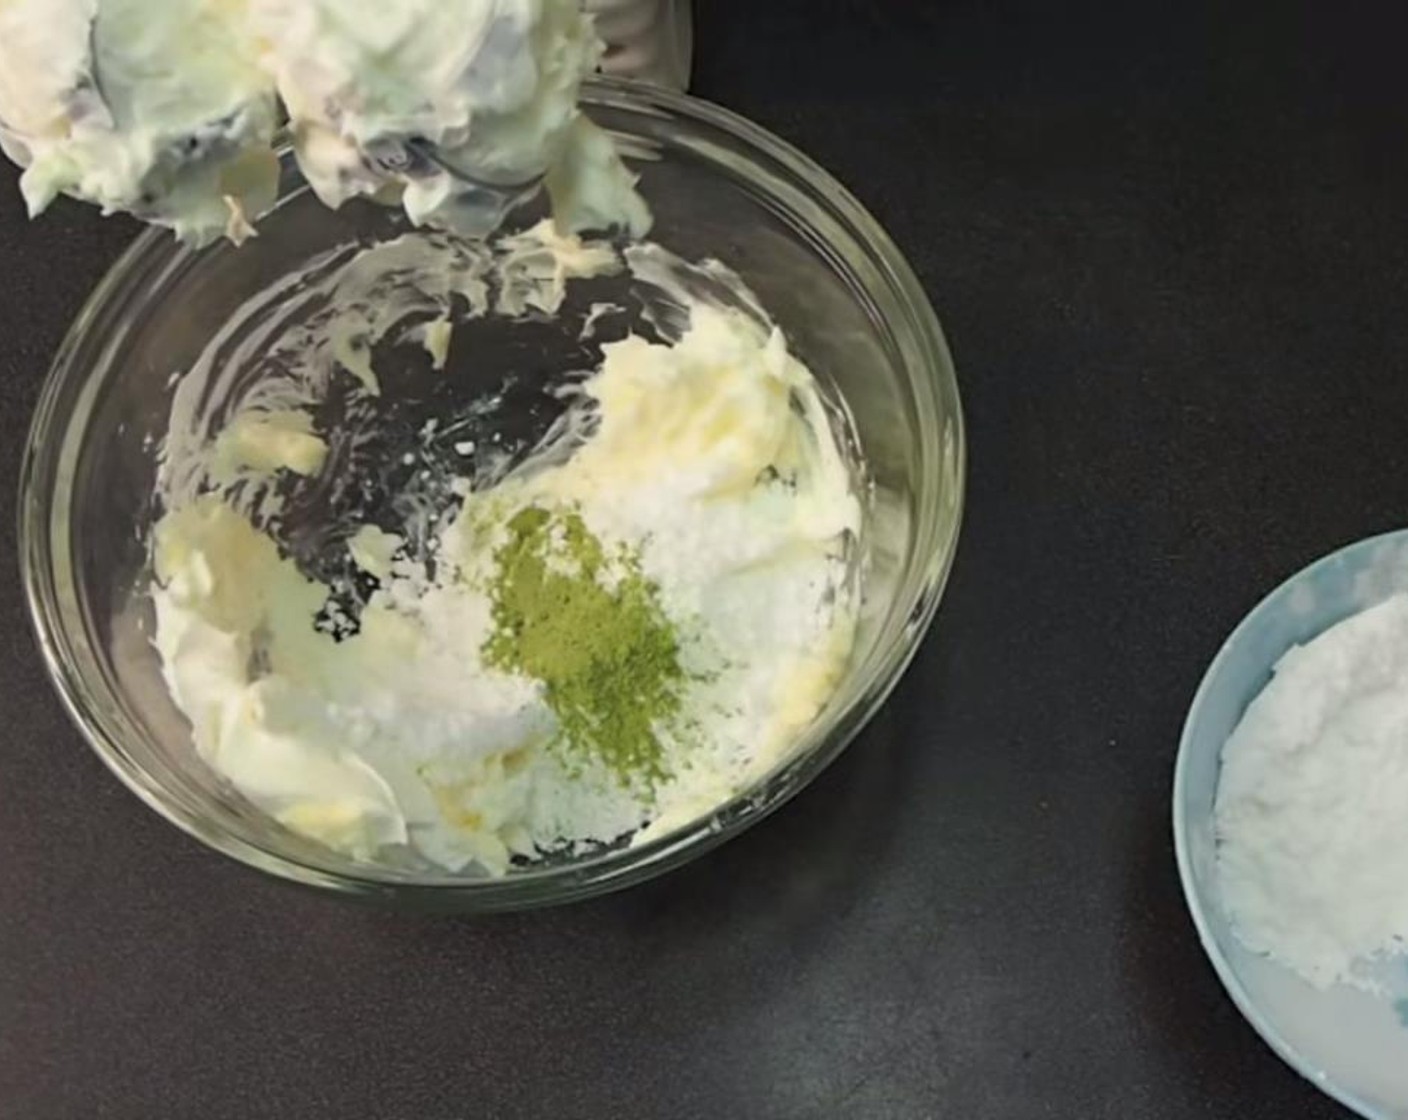 step 10 To create the filling, cream Matcha Powder (1 Tbsp), room temperature Philadelphia Original Soft Cheese (1/2 cup), Vanilla Extract (1 tsp), and sifted Powdered Confectioners Sugar (1/2 cup) together.  Fill a piping bag with the cream filling.